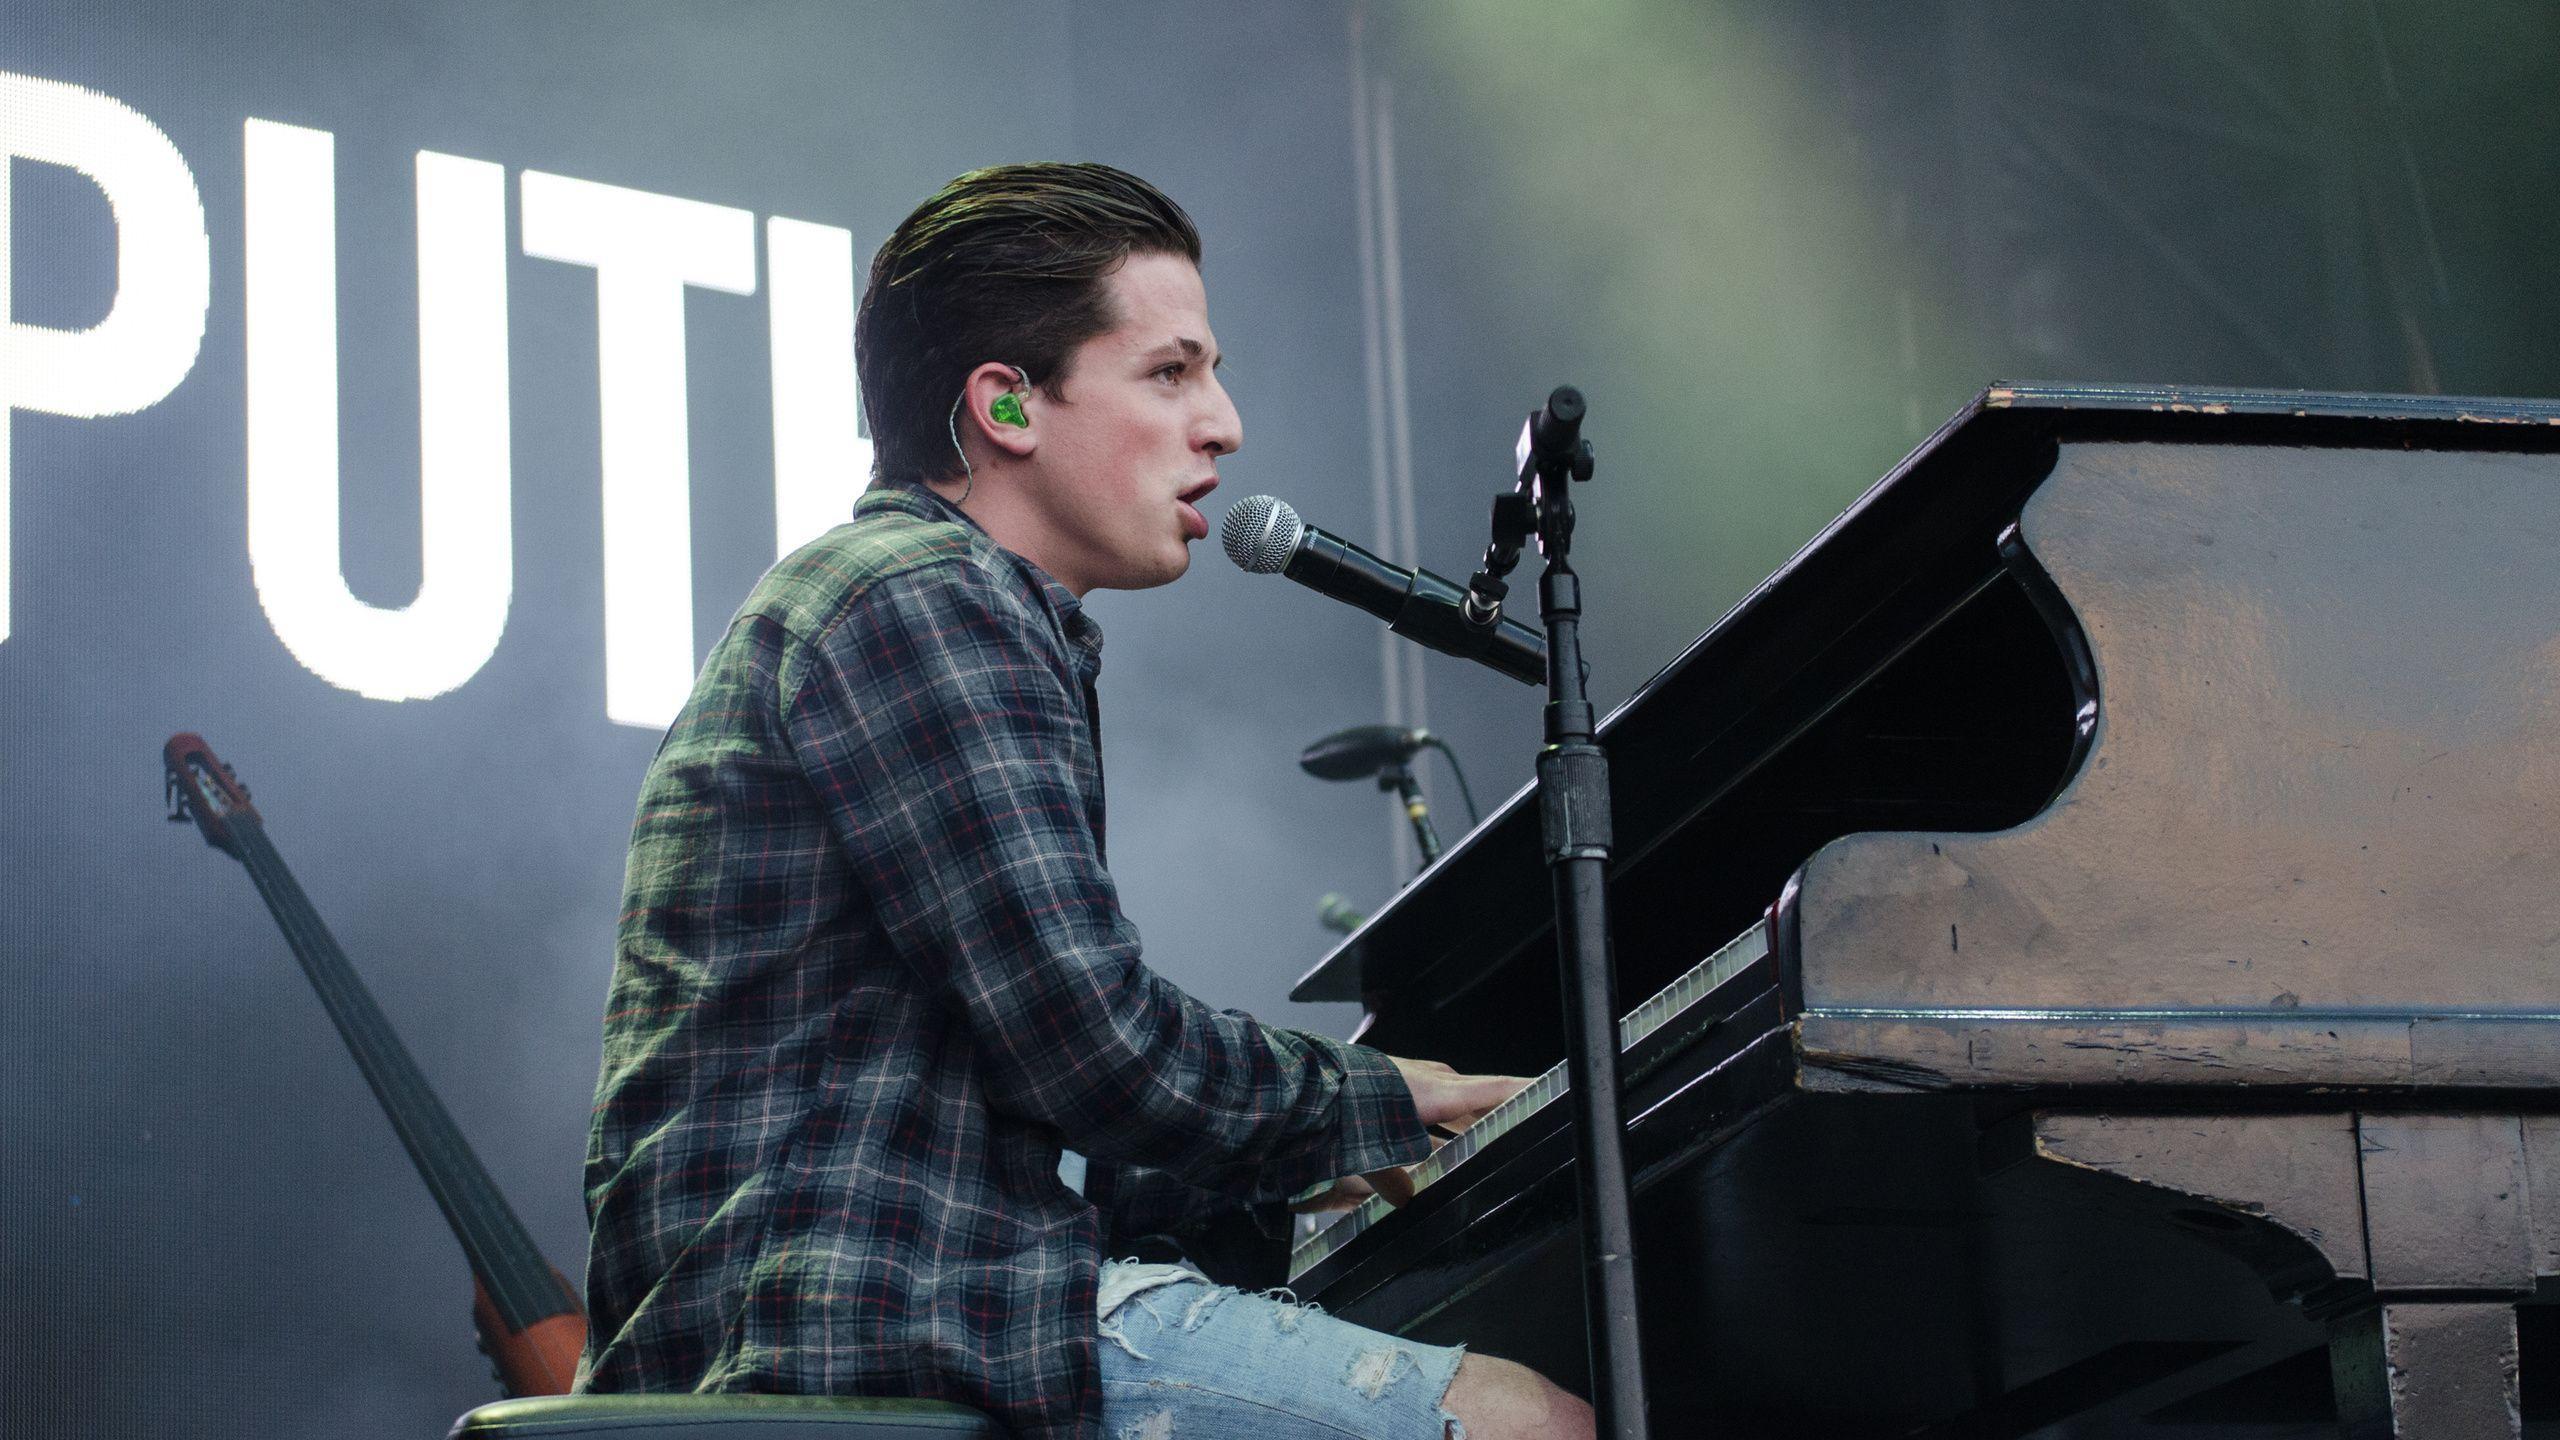 American Singer, Concert, Sports, Piano, Charlie Puth